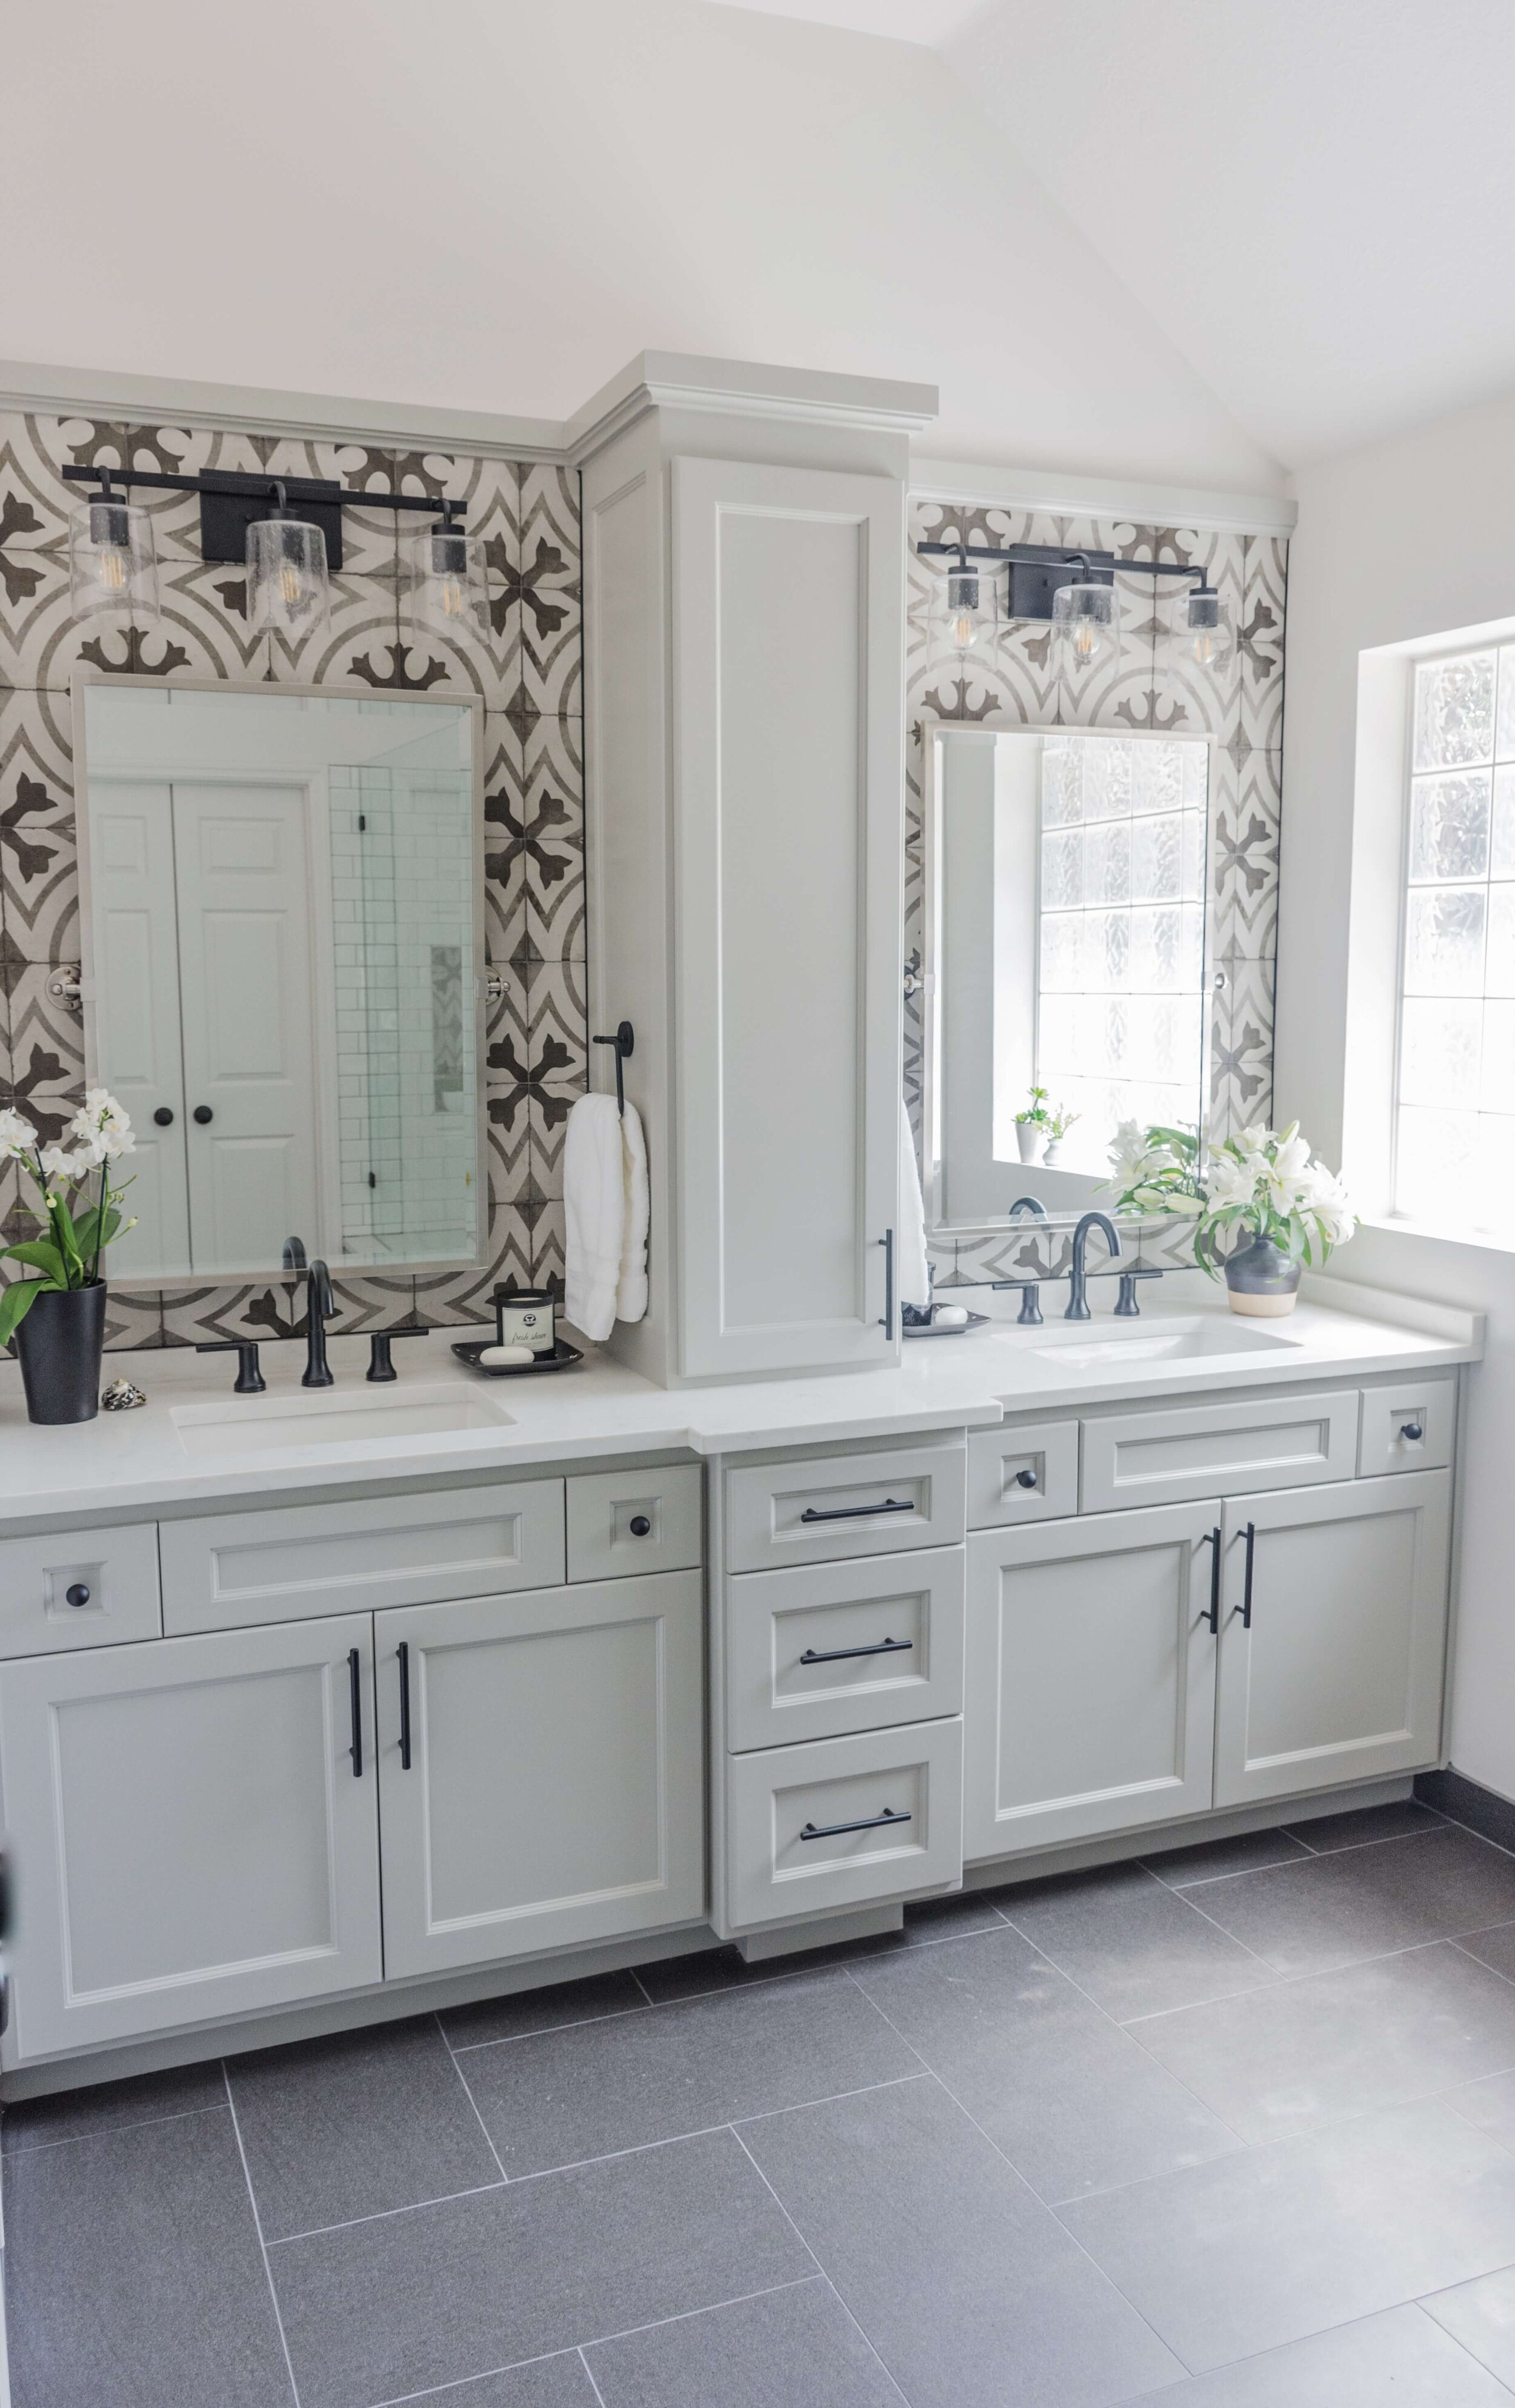 A Bathroom Remodel Q And Where The, Double Vanity With Storage Tower In The Middle